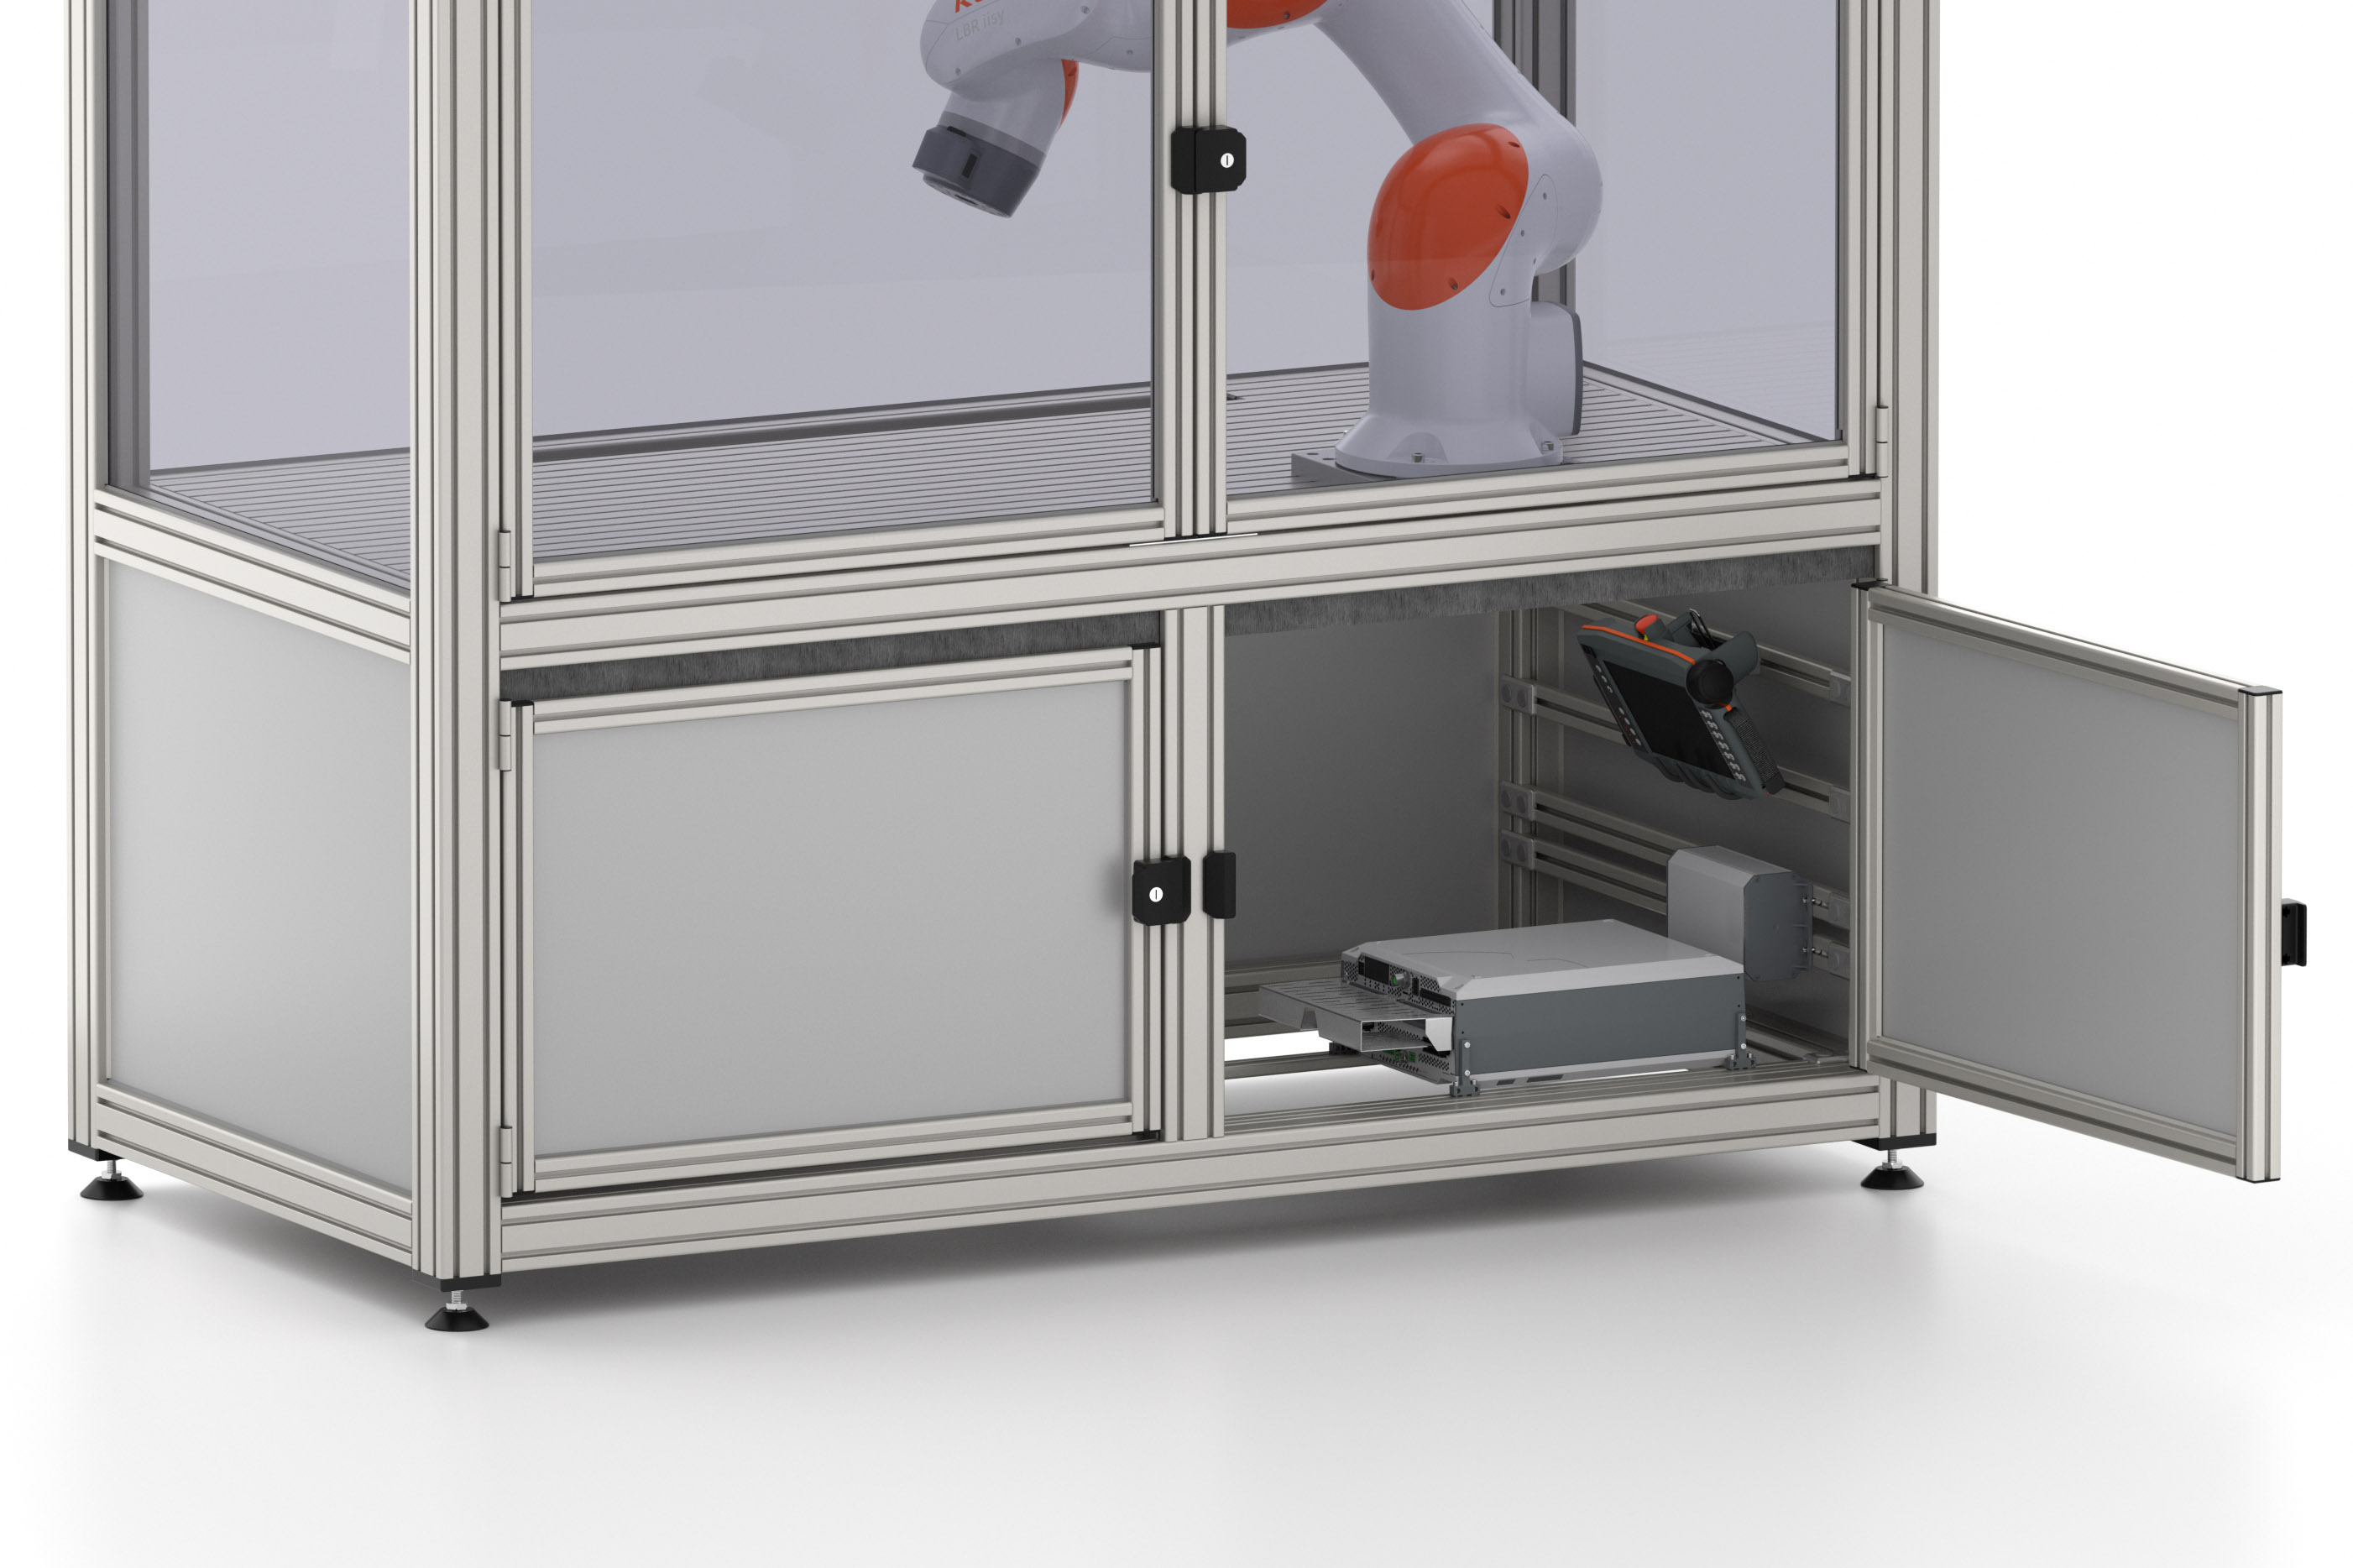 Secure robot enclosure with variable working zone